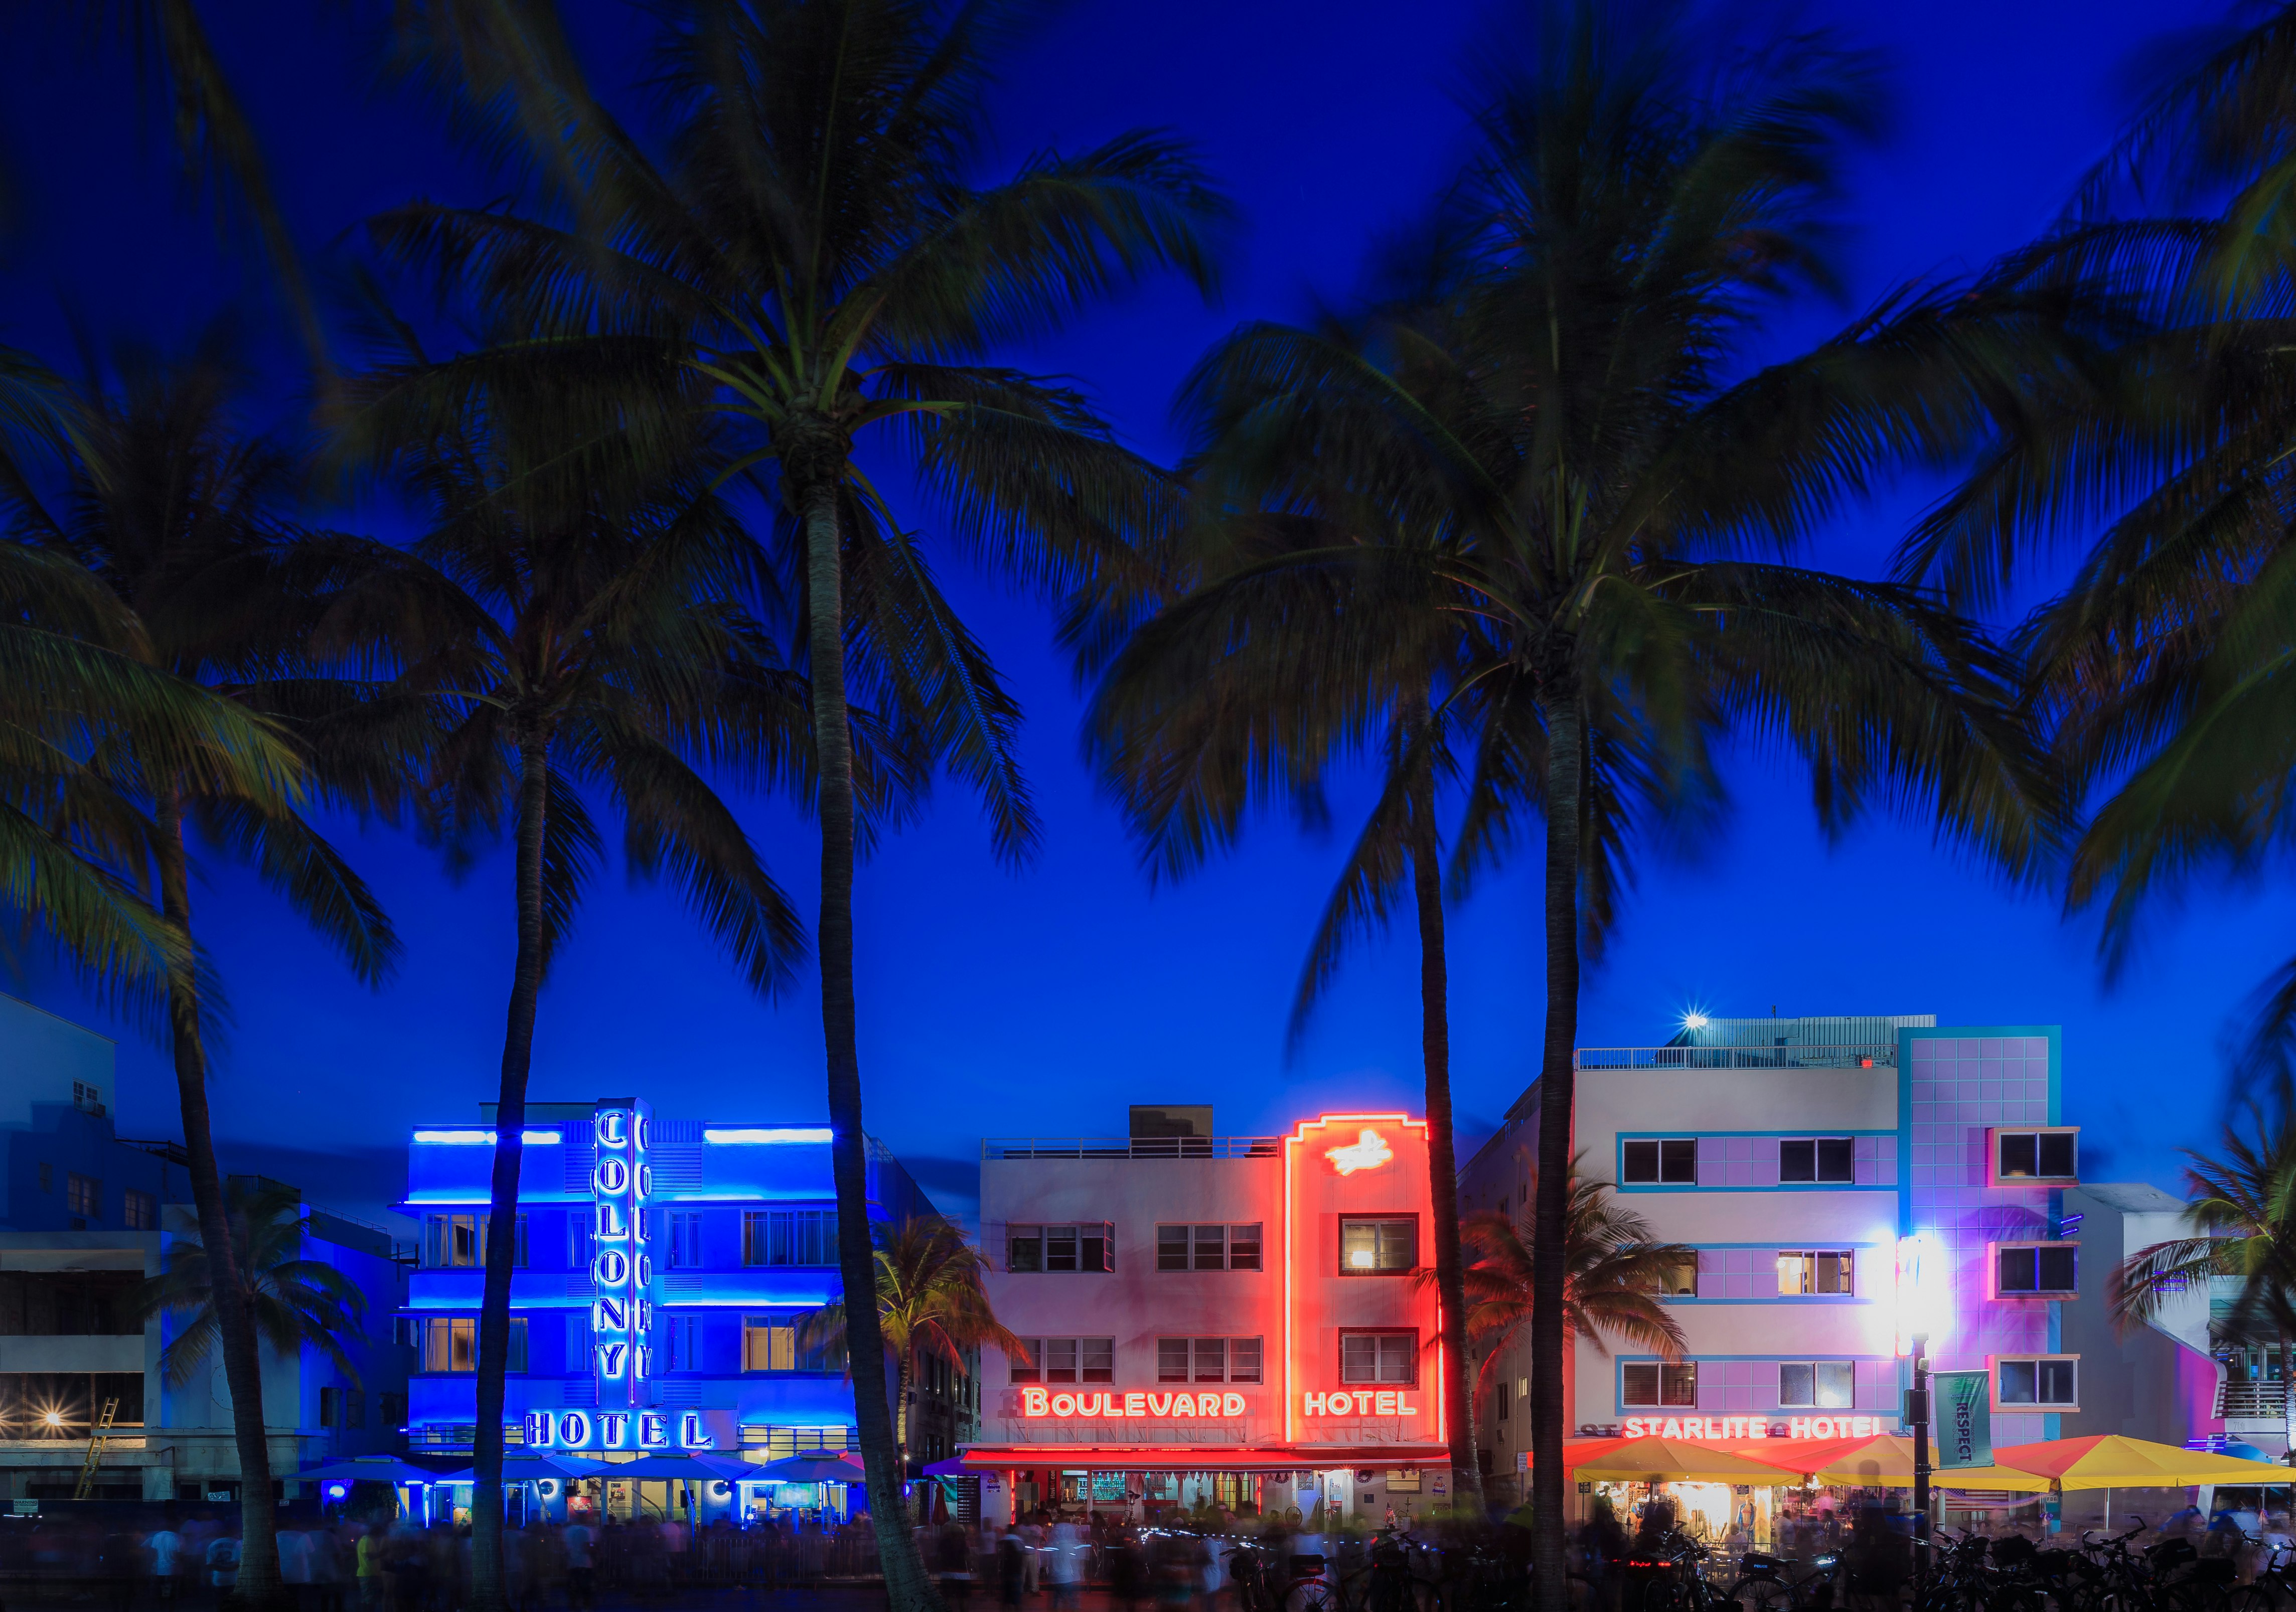 Palm trees are silhouetted against neon lights from several hotels on a popular street in Miami Beach at night